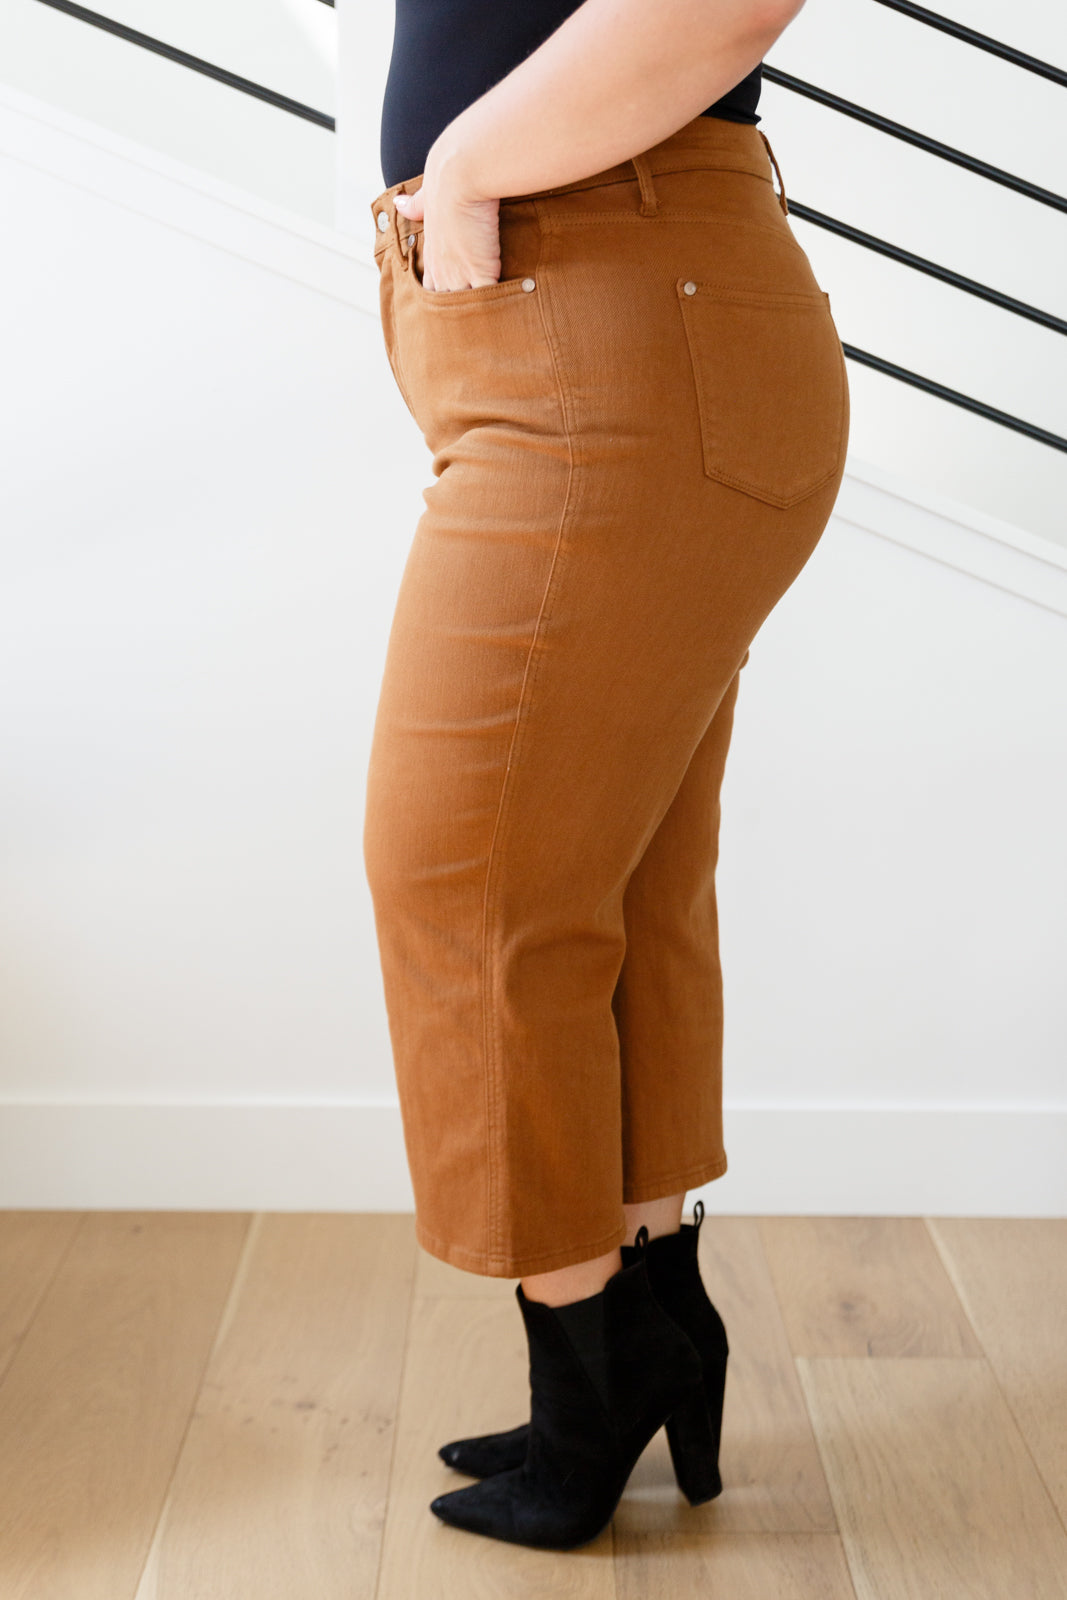 Discover your new favorite jeans with Briar's High Rise Control Top Wide Leg Crop Jeans from Judy Blue. Our triple threat of design, fit, and color come together for maximum style, comfort, and chicness. Features include high rise, tummy control tech, and a wide leg crop in a warm rich garment-dyed camel. Complete with coordinating hardware and you're ready to look and feel amazing!